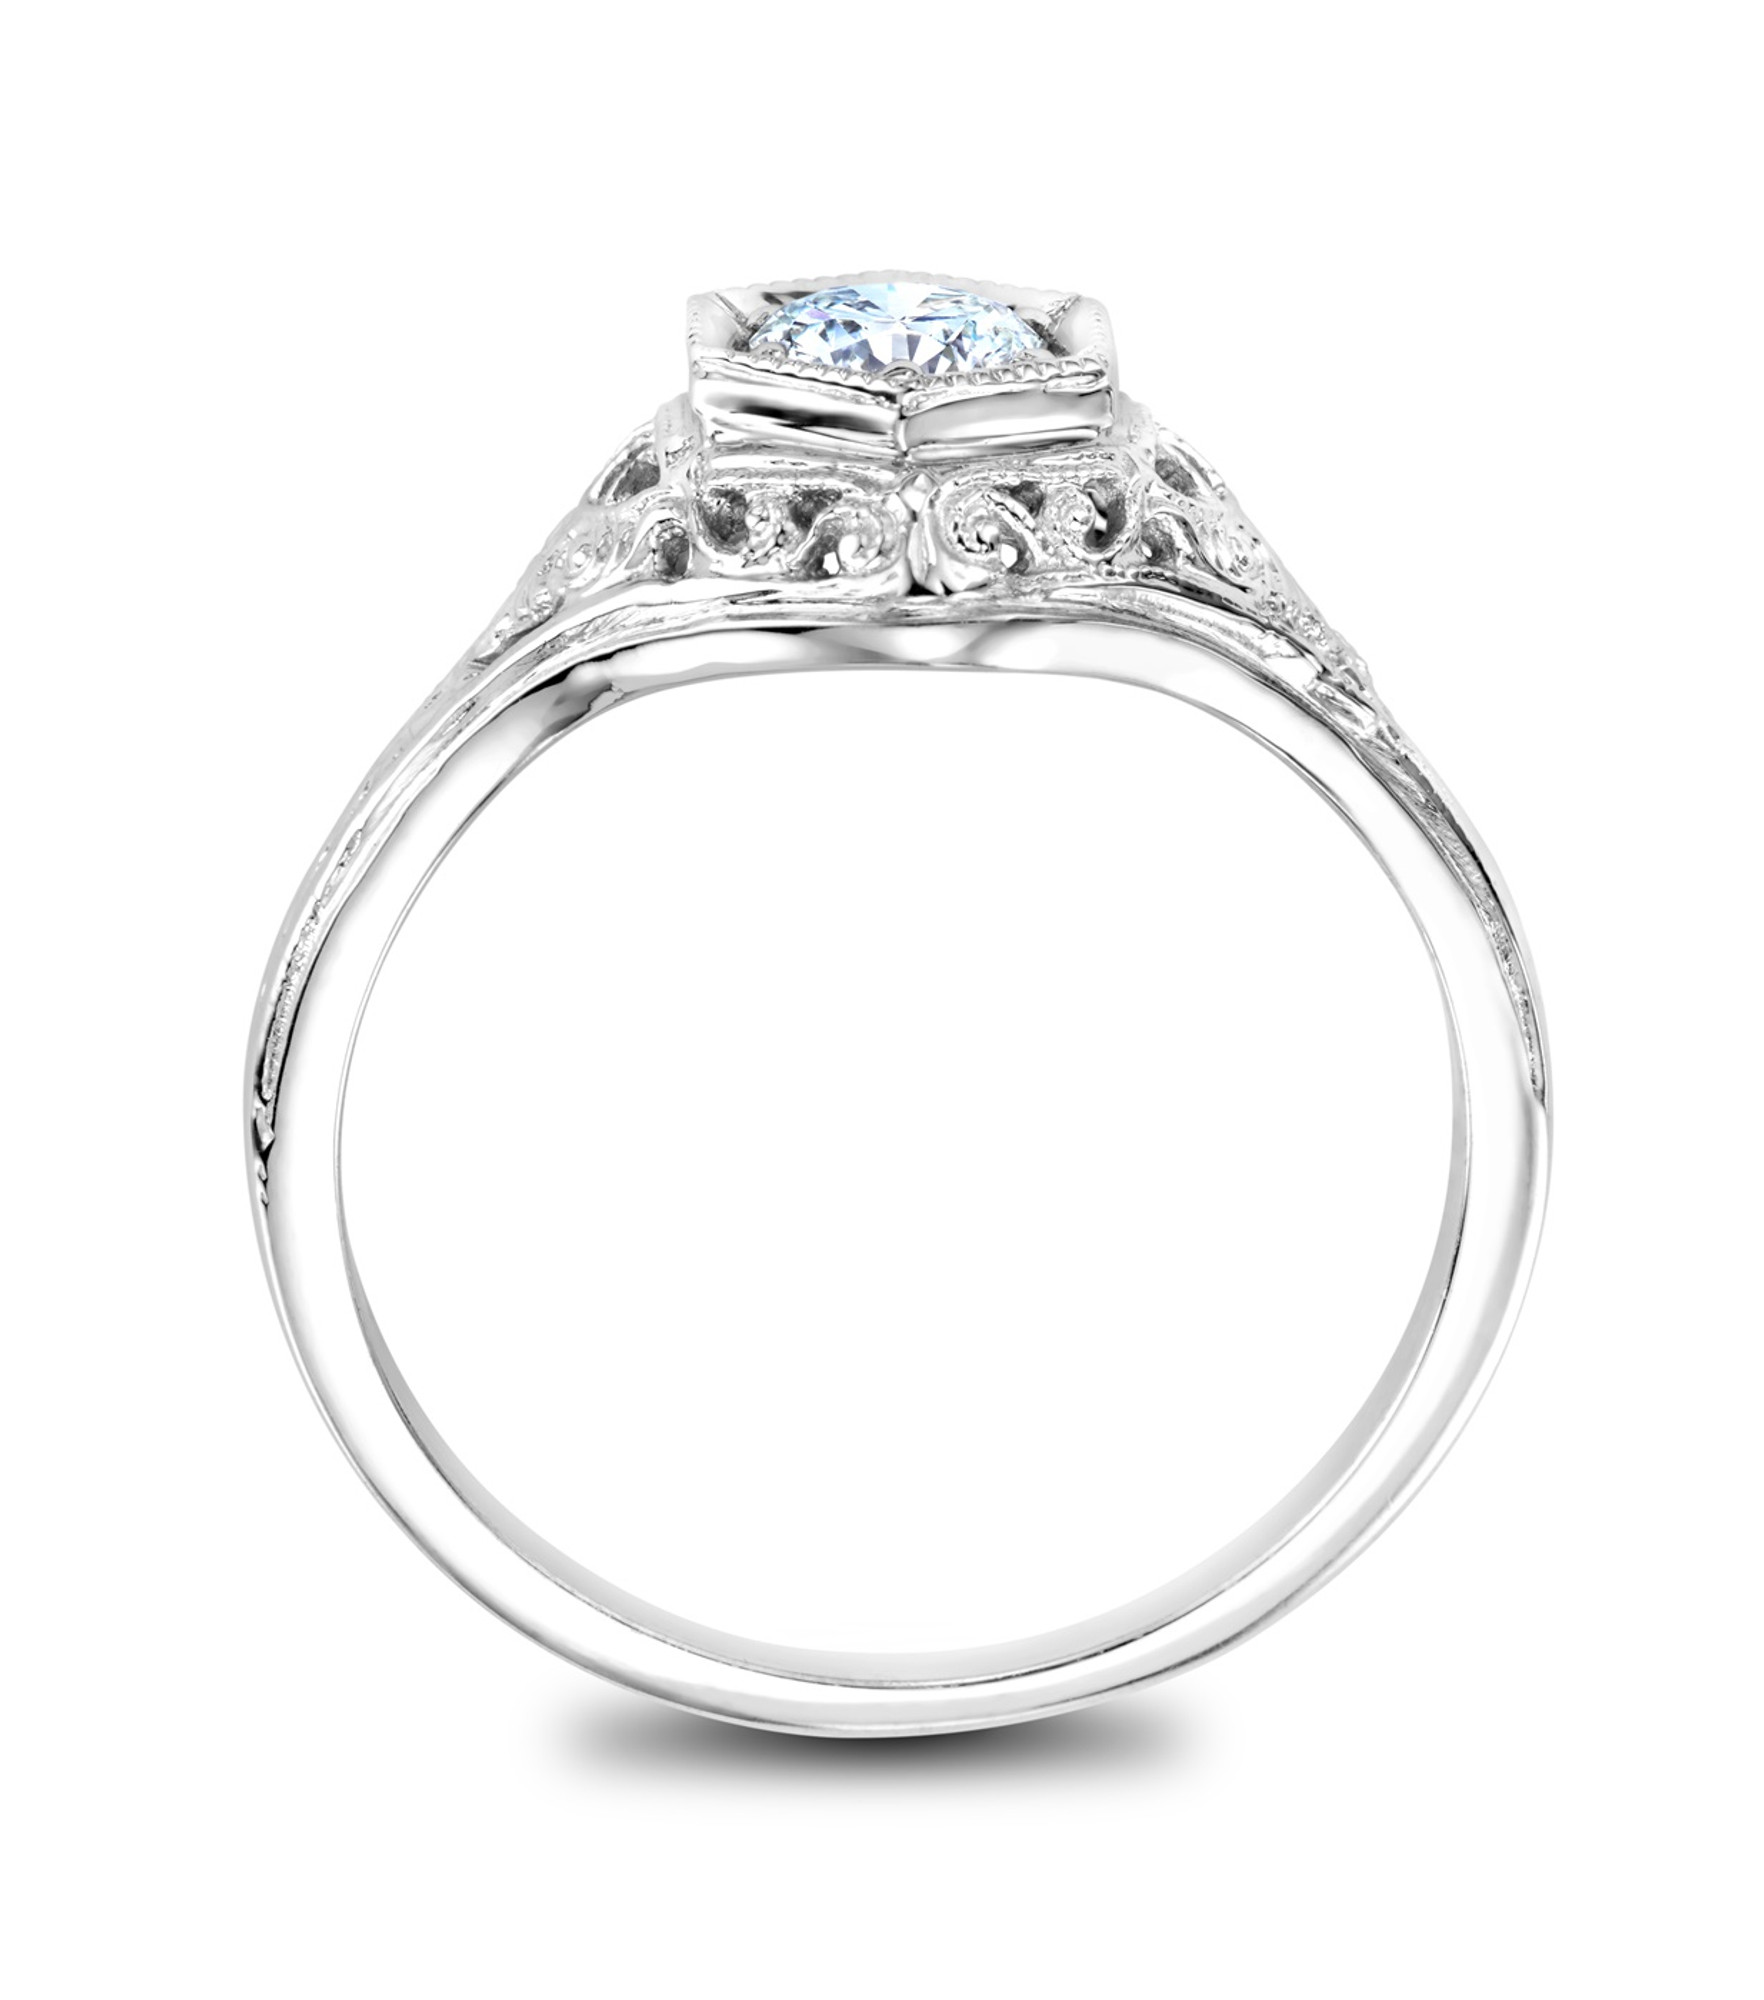 Galleria Vintage Filigree Engagement Ring with Round Cut Diamond in 14KT  White Gold | With Clarity